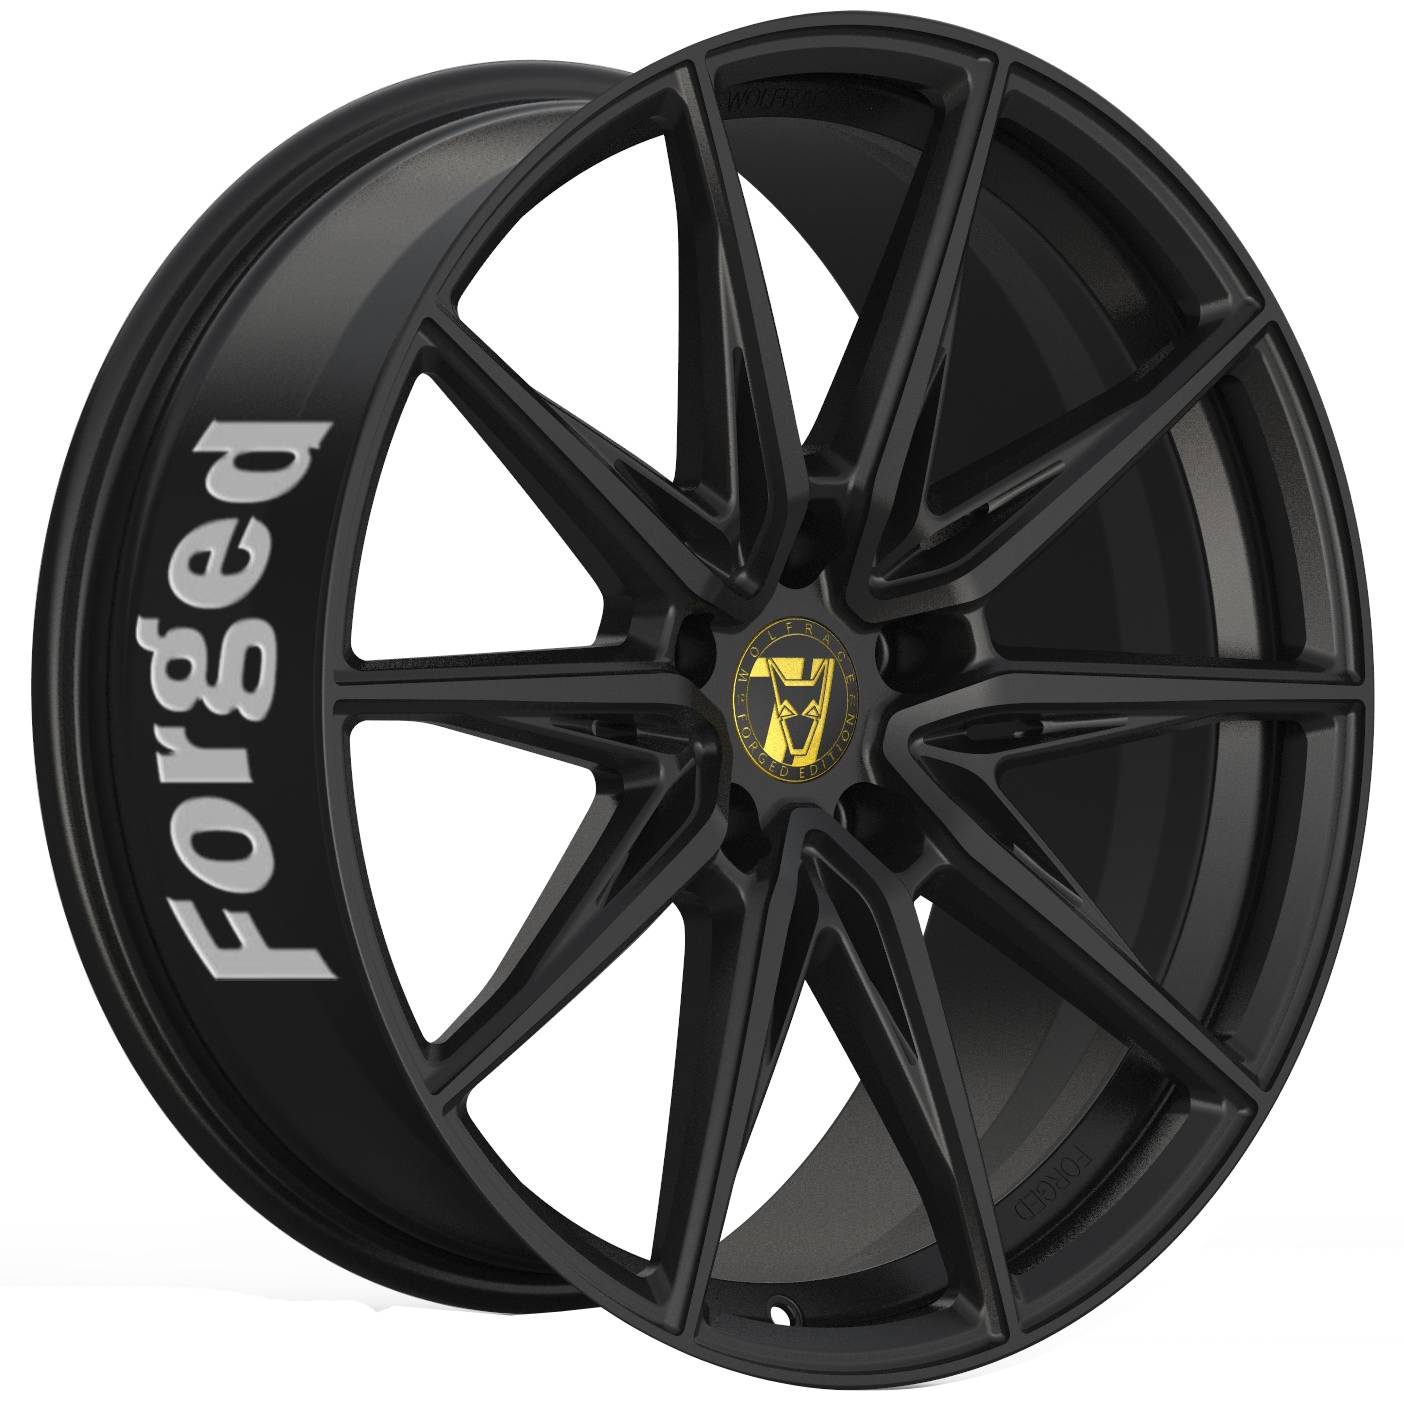 Demon Wheels 71 Forged Edition Urban Racer Forged [9.5x23] -5x114.3- ET 45